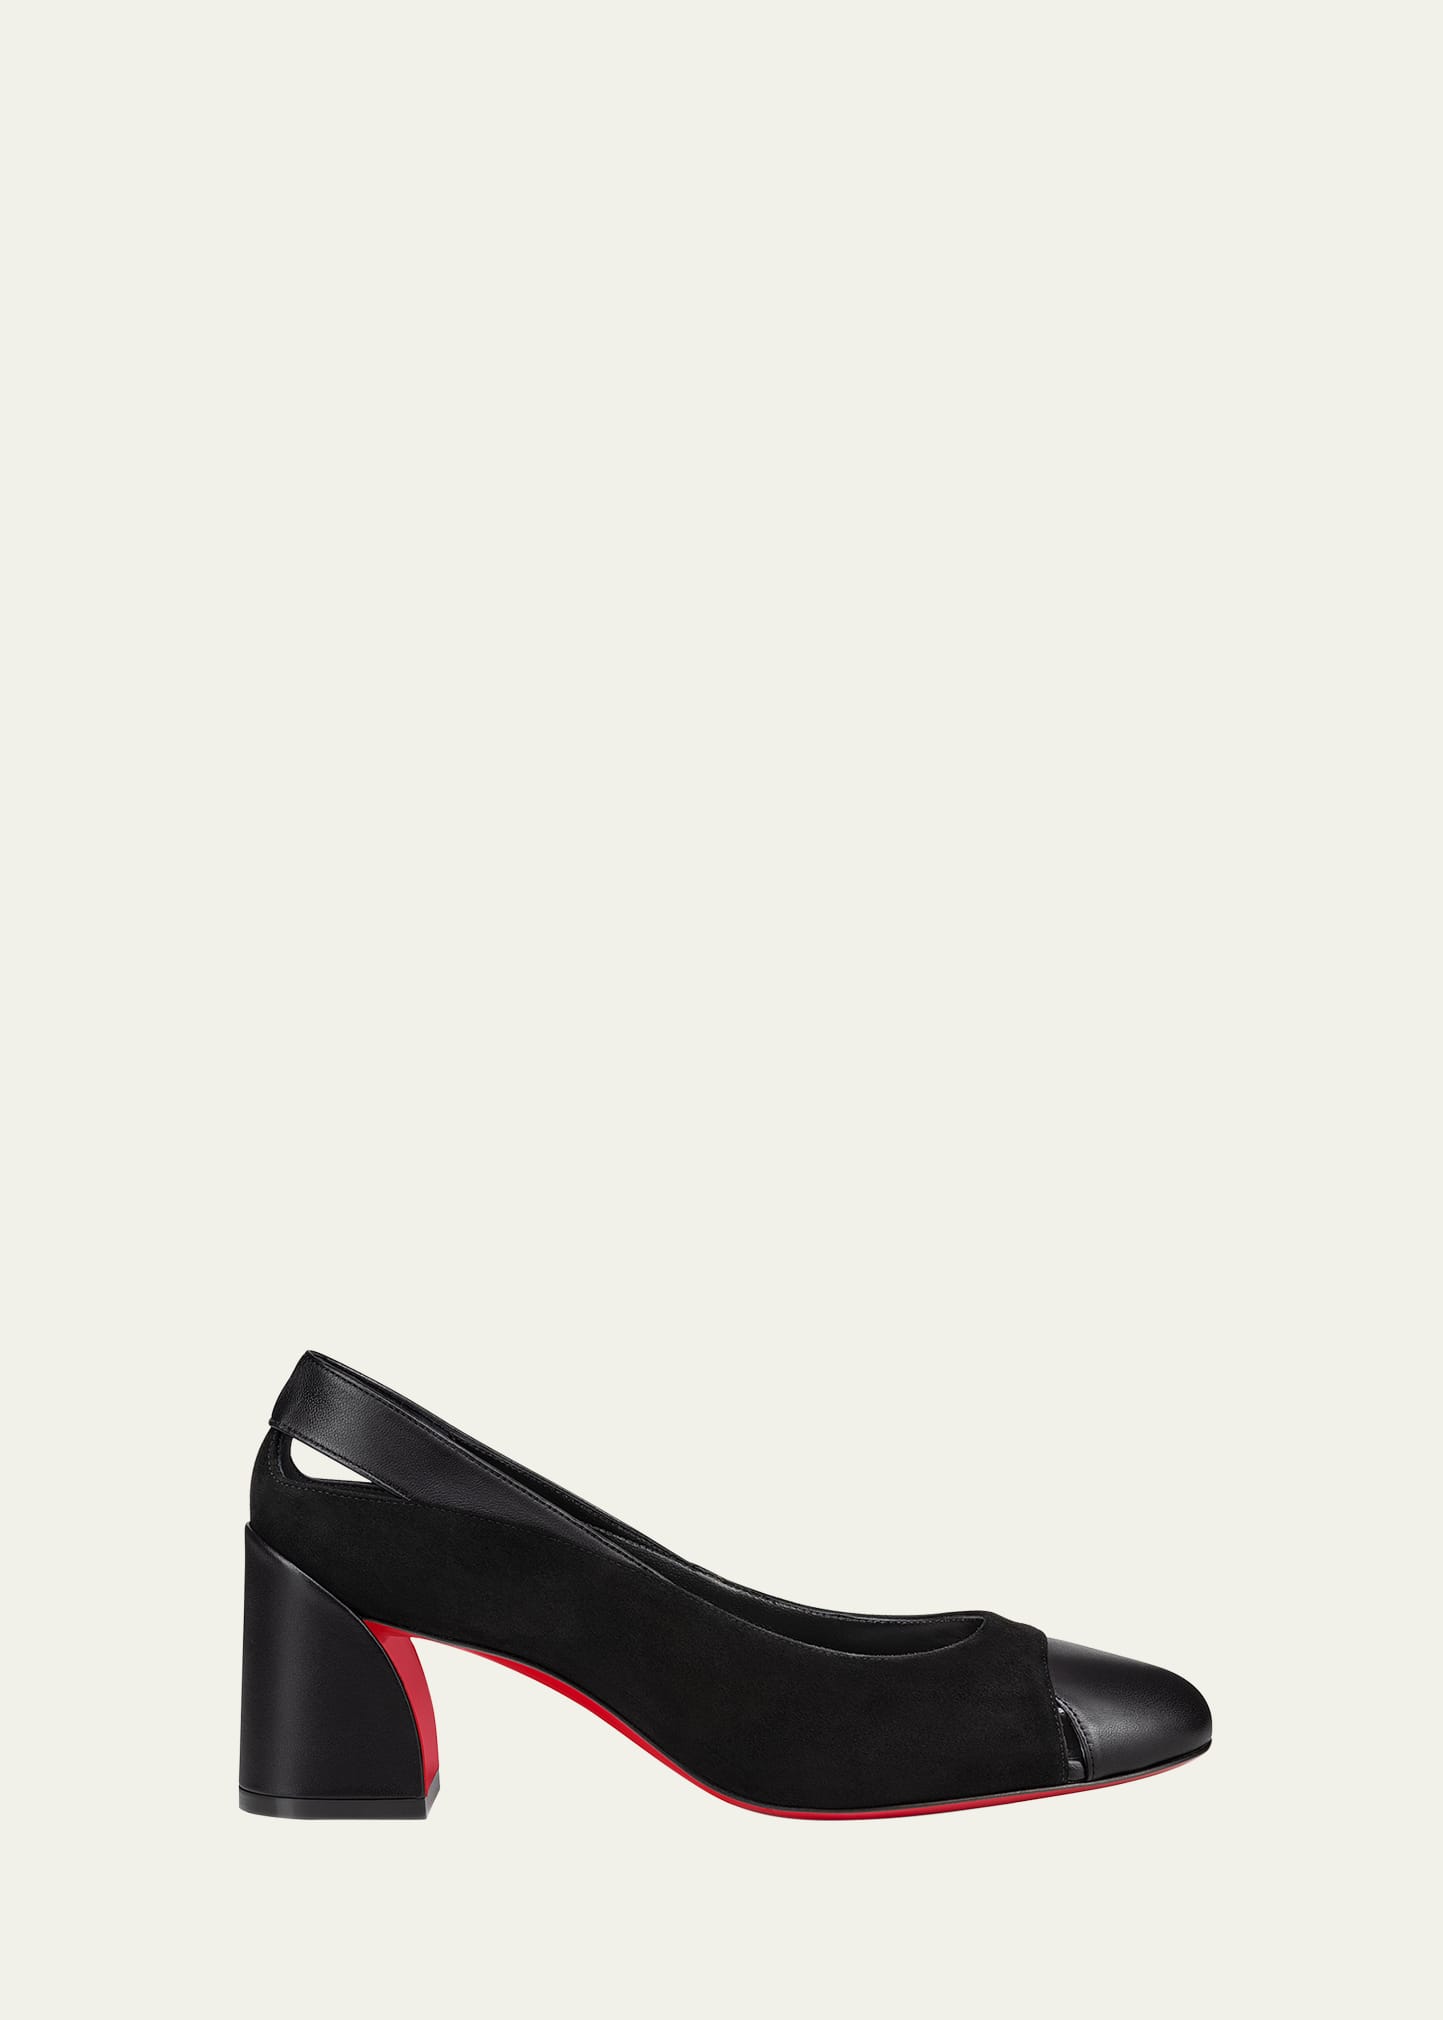 CHRISTIAN LOUBOUTIN MISS DUVETTE MIXED LEATHER RED SOLE PUMPS